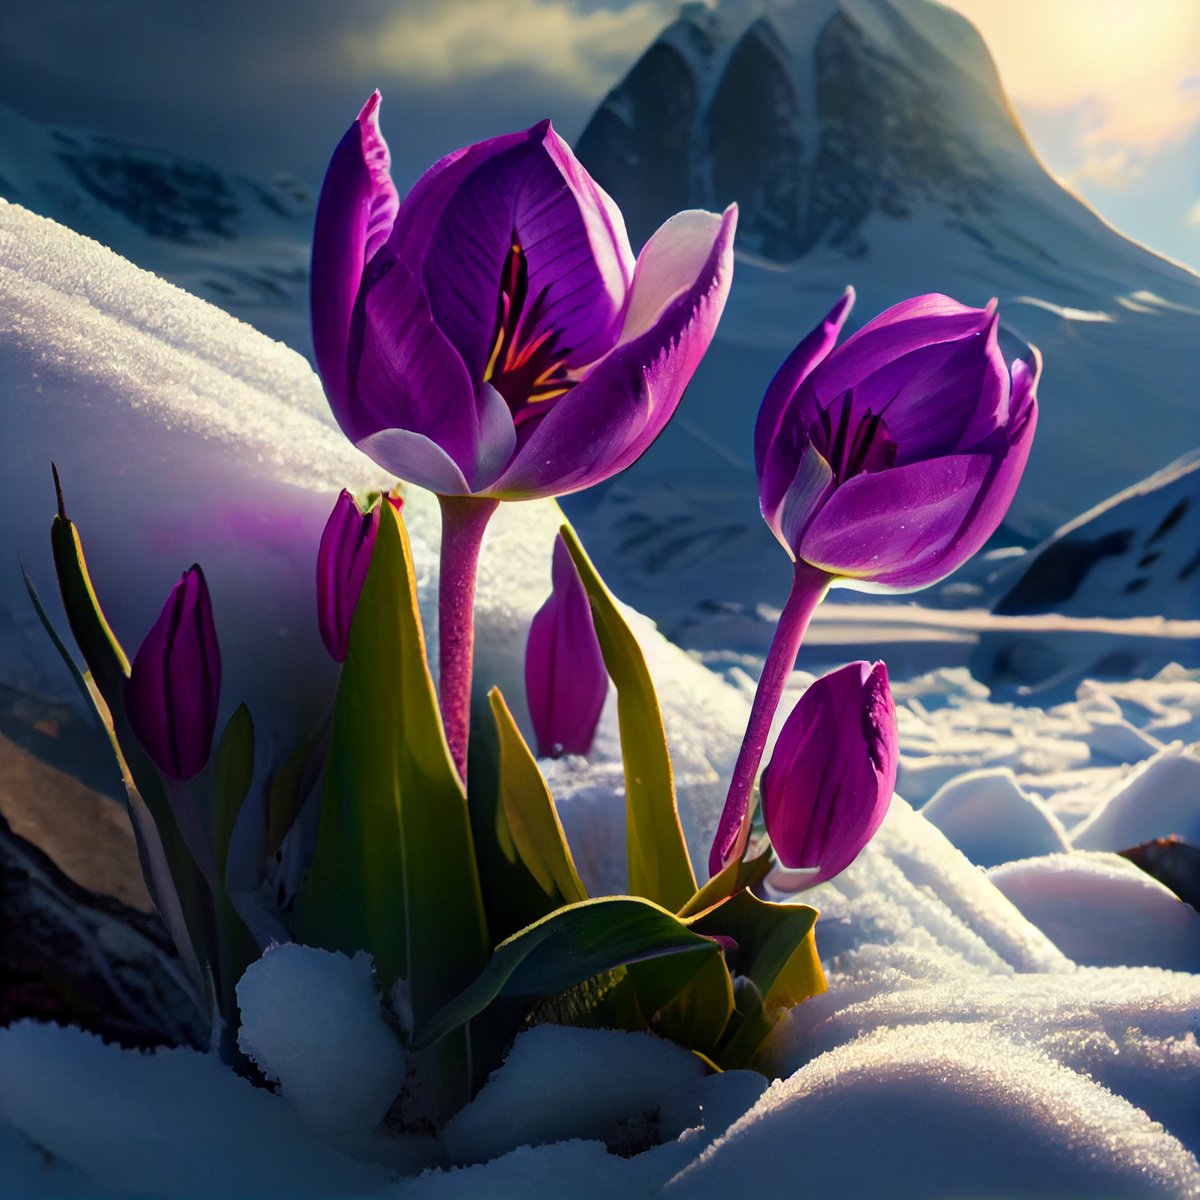 ❤️🤣 Bringing a pop of color to a winter wonderland 💜🌷❄️ Check out these stunning purple #tulips in the snow with a mountain backdrop and sunbeam shining through. #PurpleTulips #SnowyScenery  #MountainView #Sunbeam

😎👉Watch videos for $0.00 with Prime:
amzn.to/3H3k7Yv